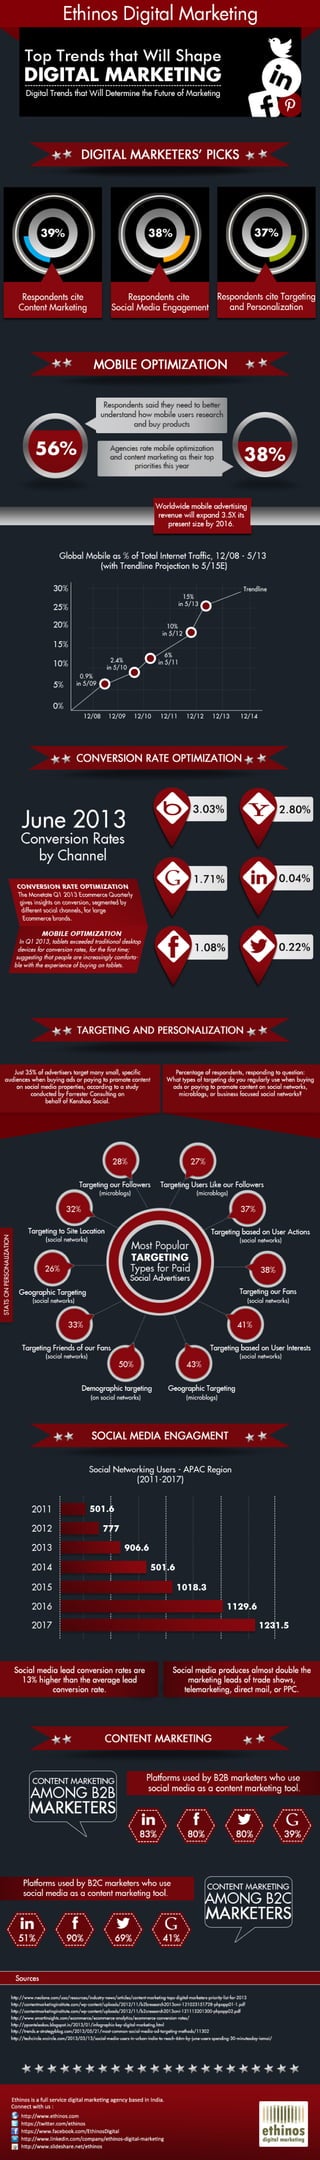 Infograhpic on the Top Trends that will Shape Digital Marketing